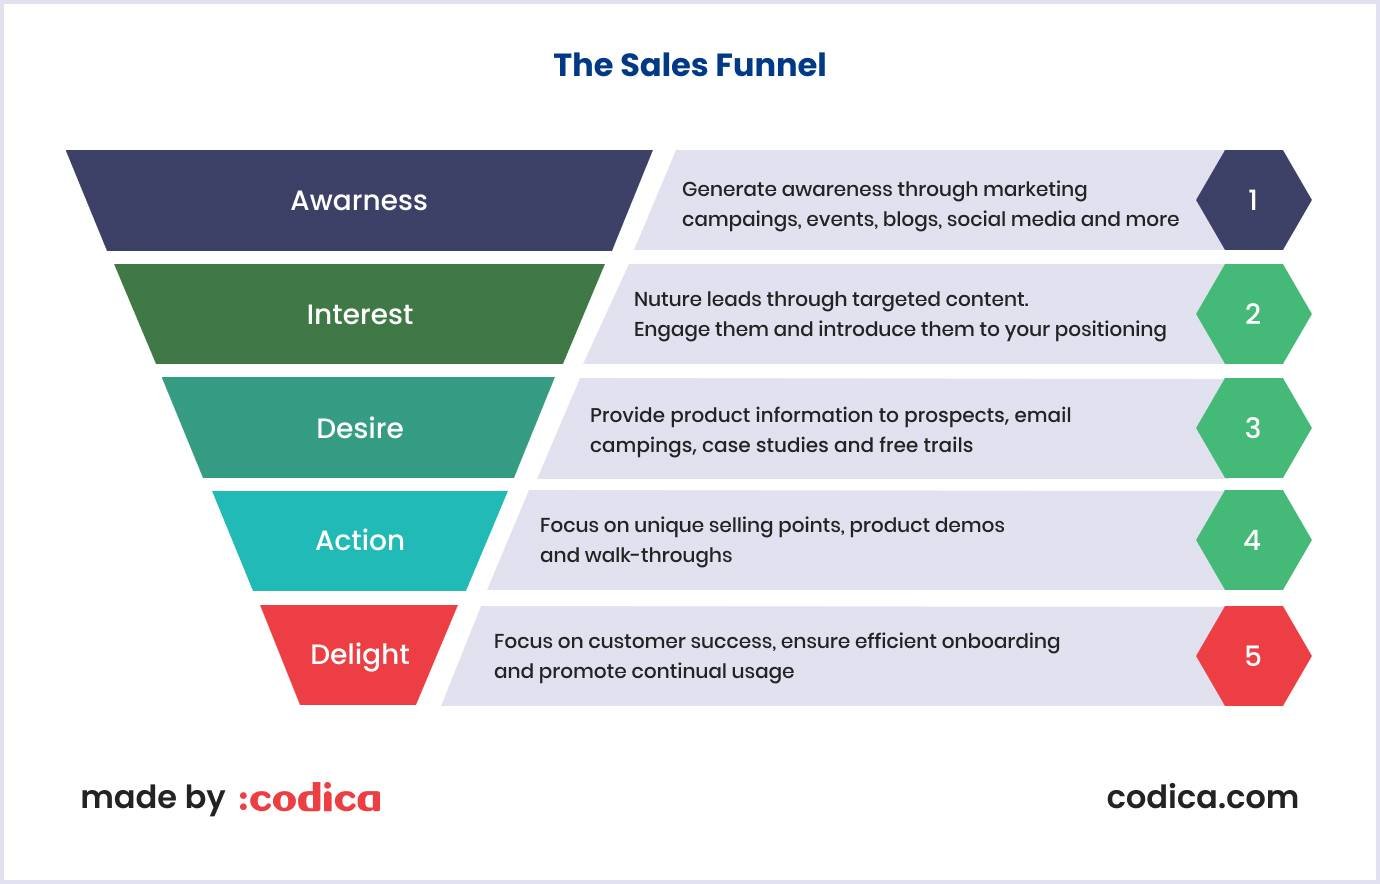 Sales funnel by stages